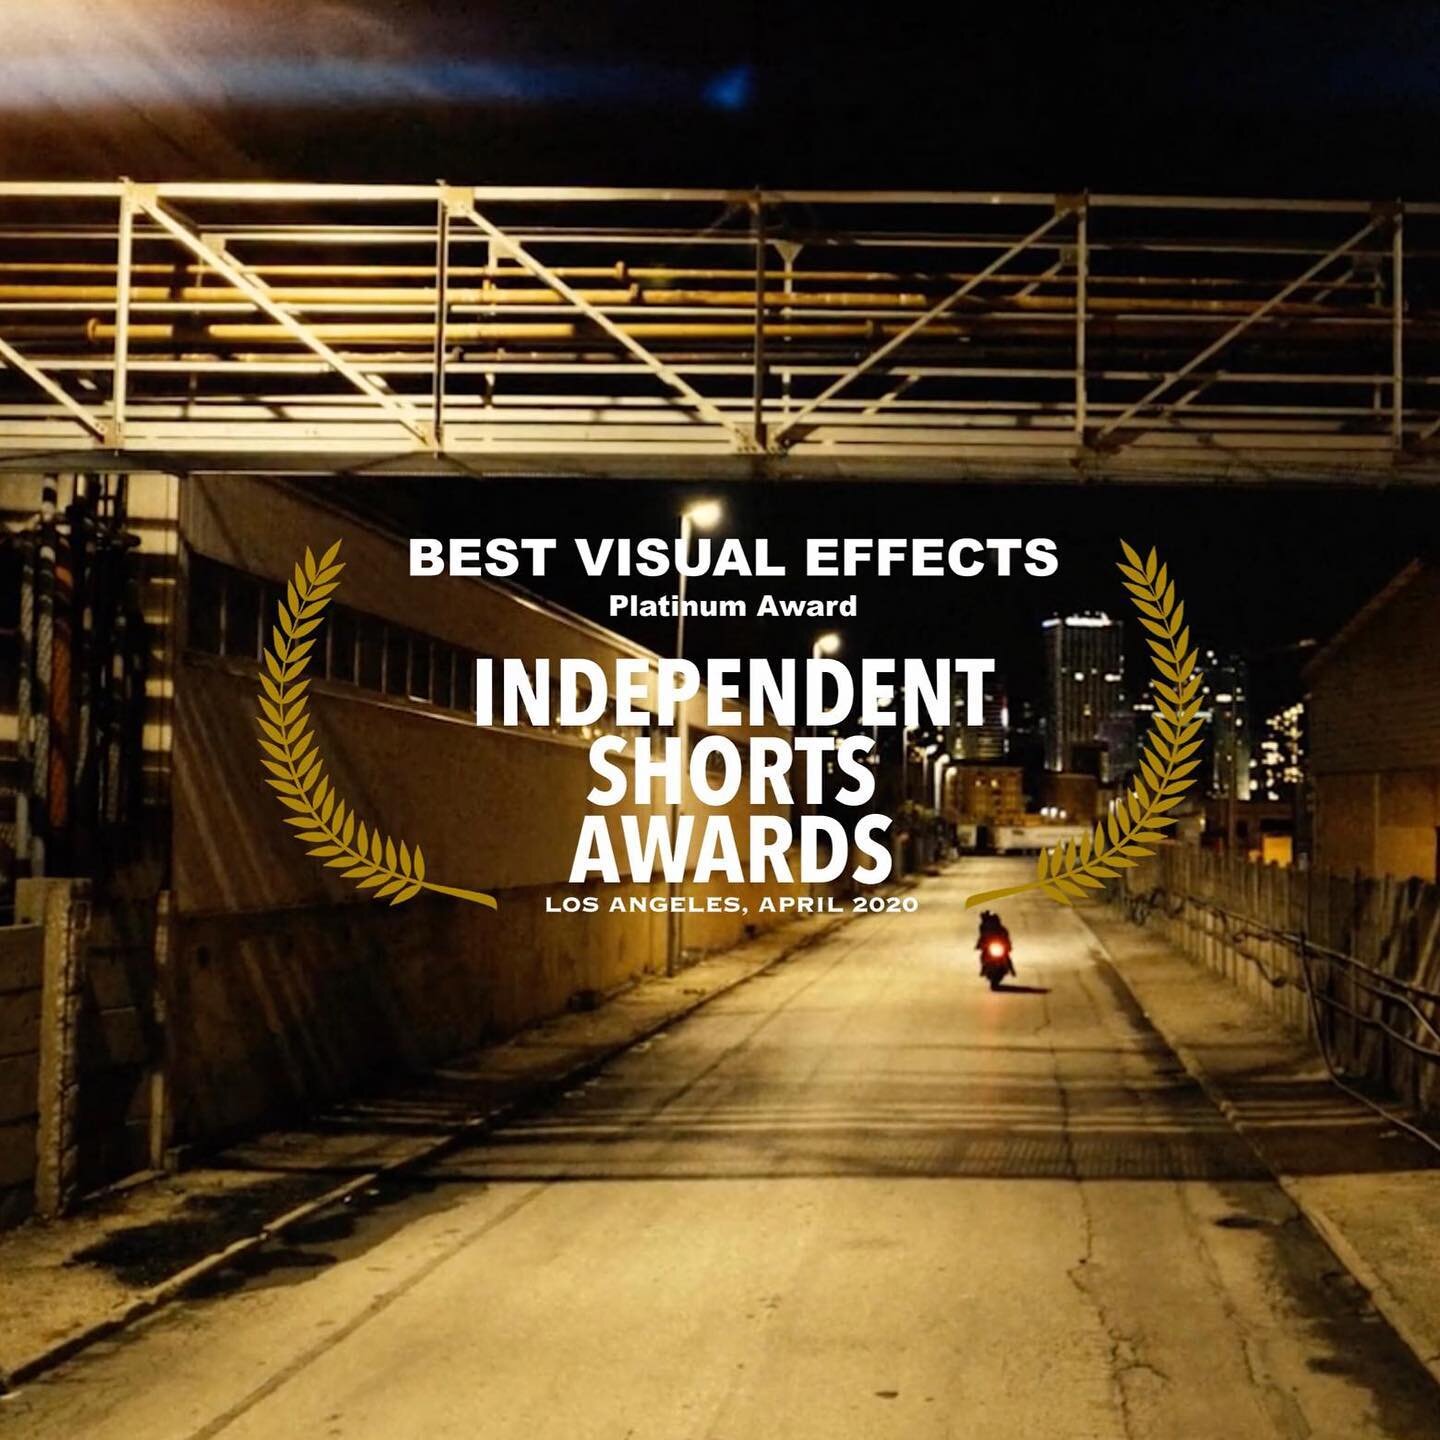 Platinum Award for Best VFX from L.A. @independentshortsawards . This cool result I share with @sic.est and @brunoeritt &ldquo;Notebook&rdquo; is a project by @fewmoney_vision (best male director) DOP @giacomonacadop (best cinematography) @whiteframe